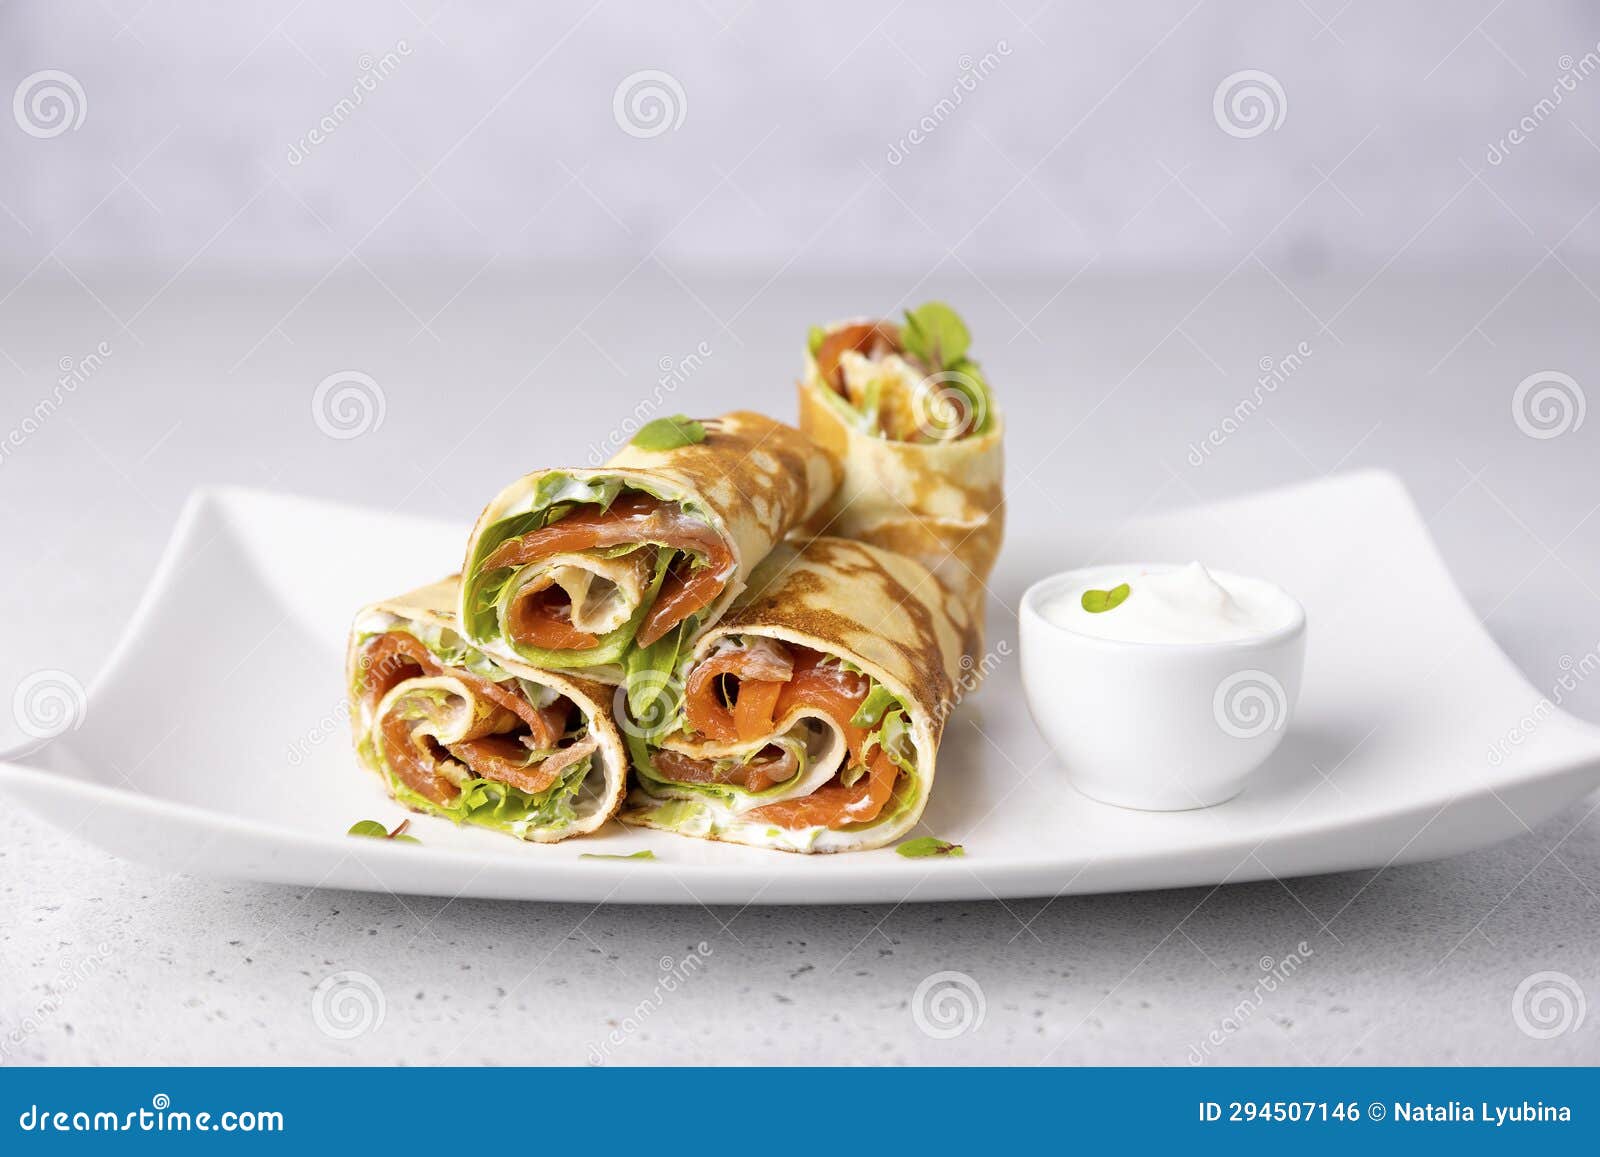 pancakes with salmon (trout), sour cream and greenstuff. thin, not sweet blinchiki stuffed with red fish.